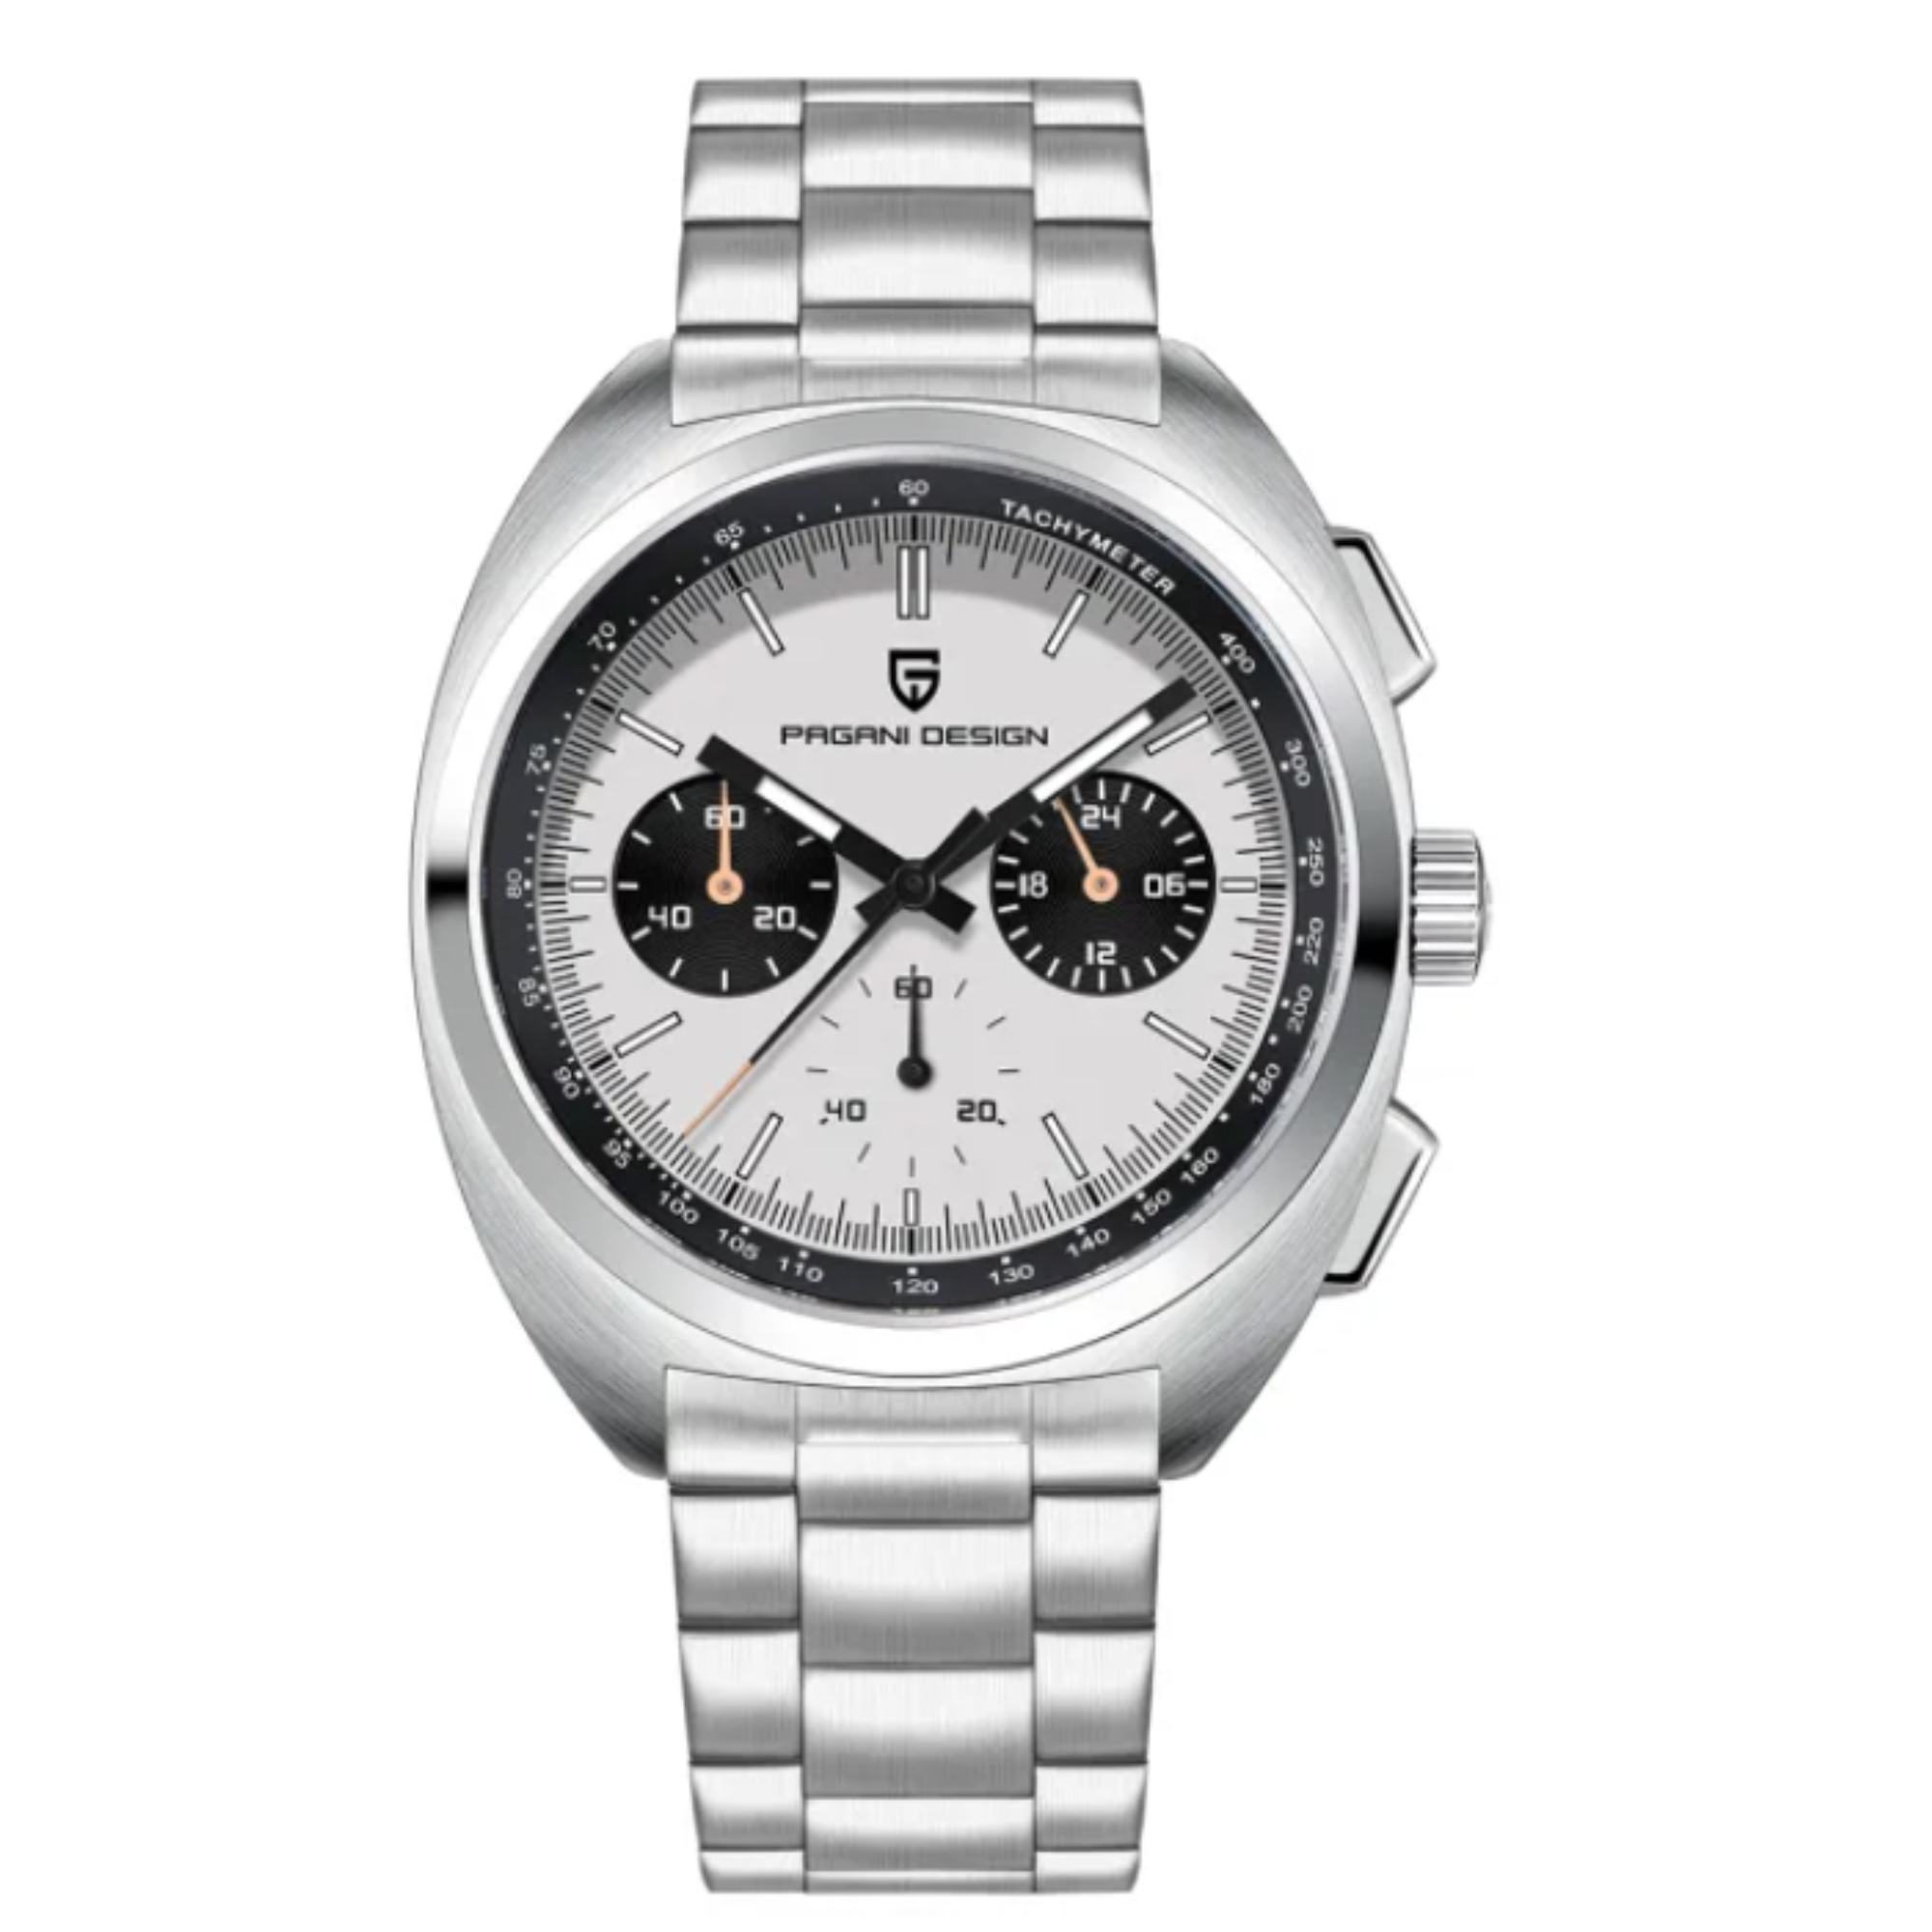 PAGANI DESIGN PD-1782 Men's Quartz Watches Chronograph Stainless Steel 40mm Sports Wrist Watch for Men - White Dial